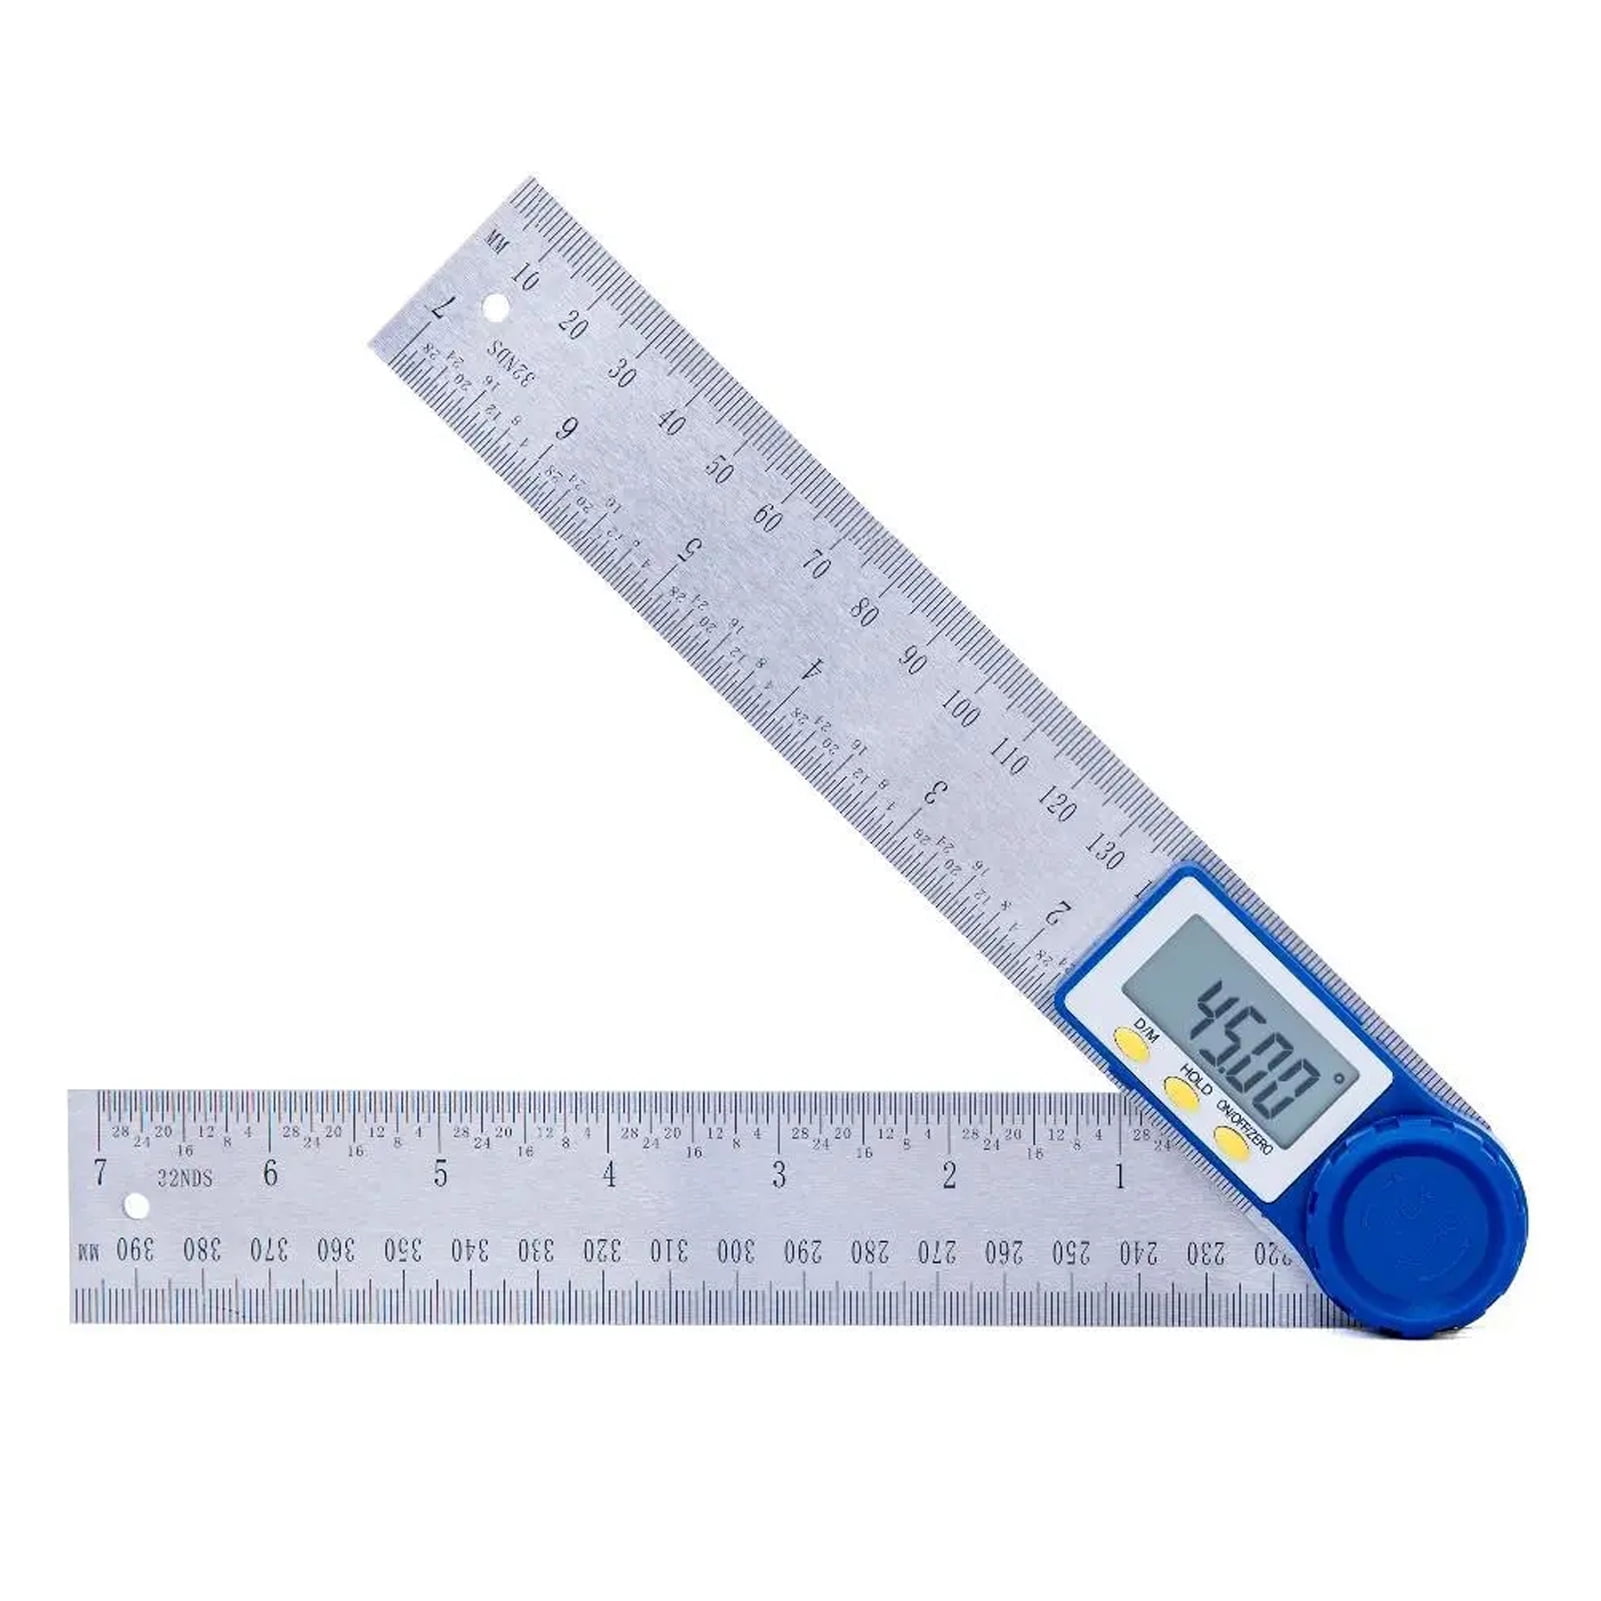 Digital Angle Finder Goniometer Precise Electronic Protractor Meter Ruler 